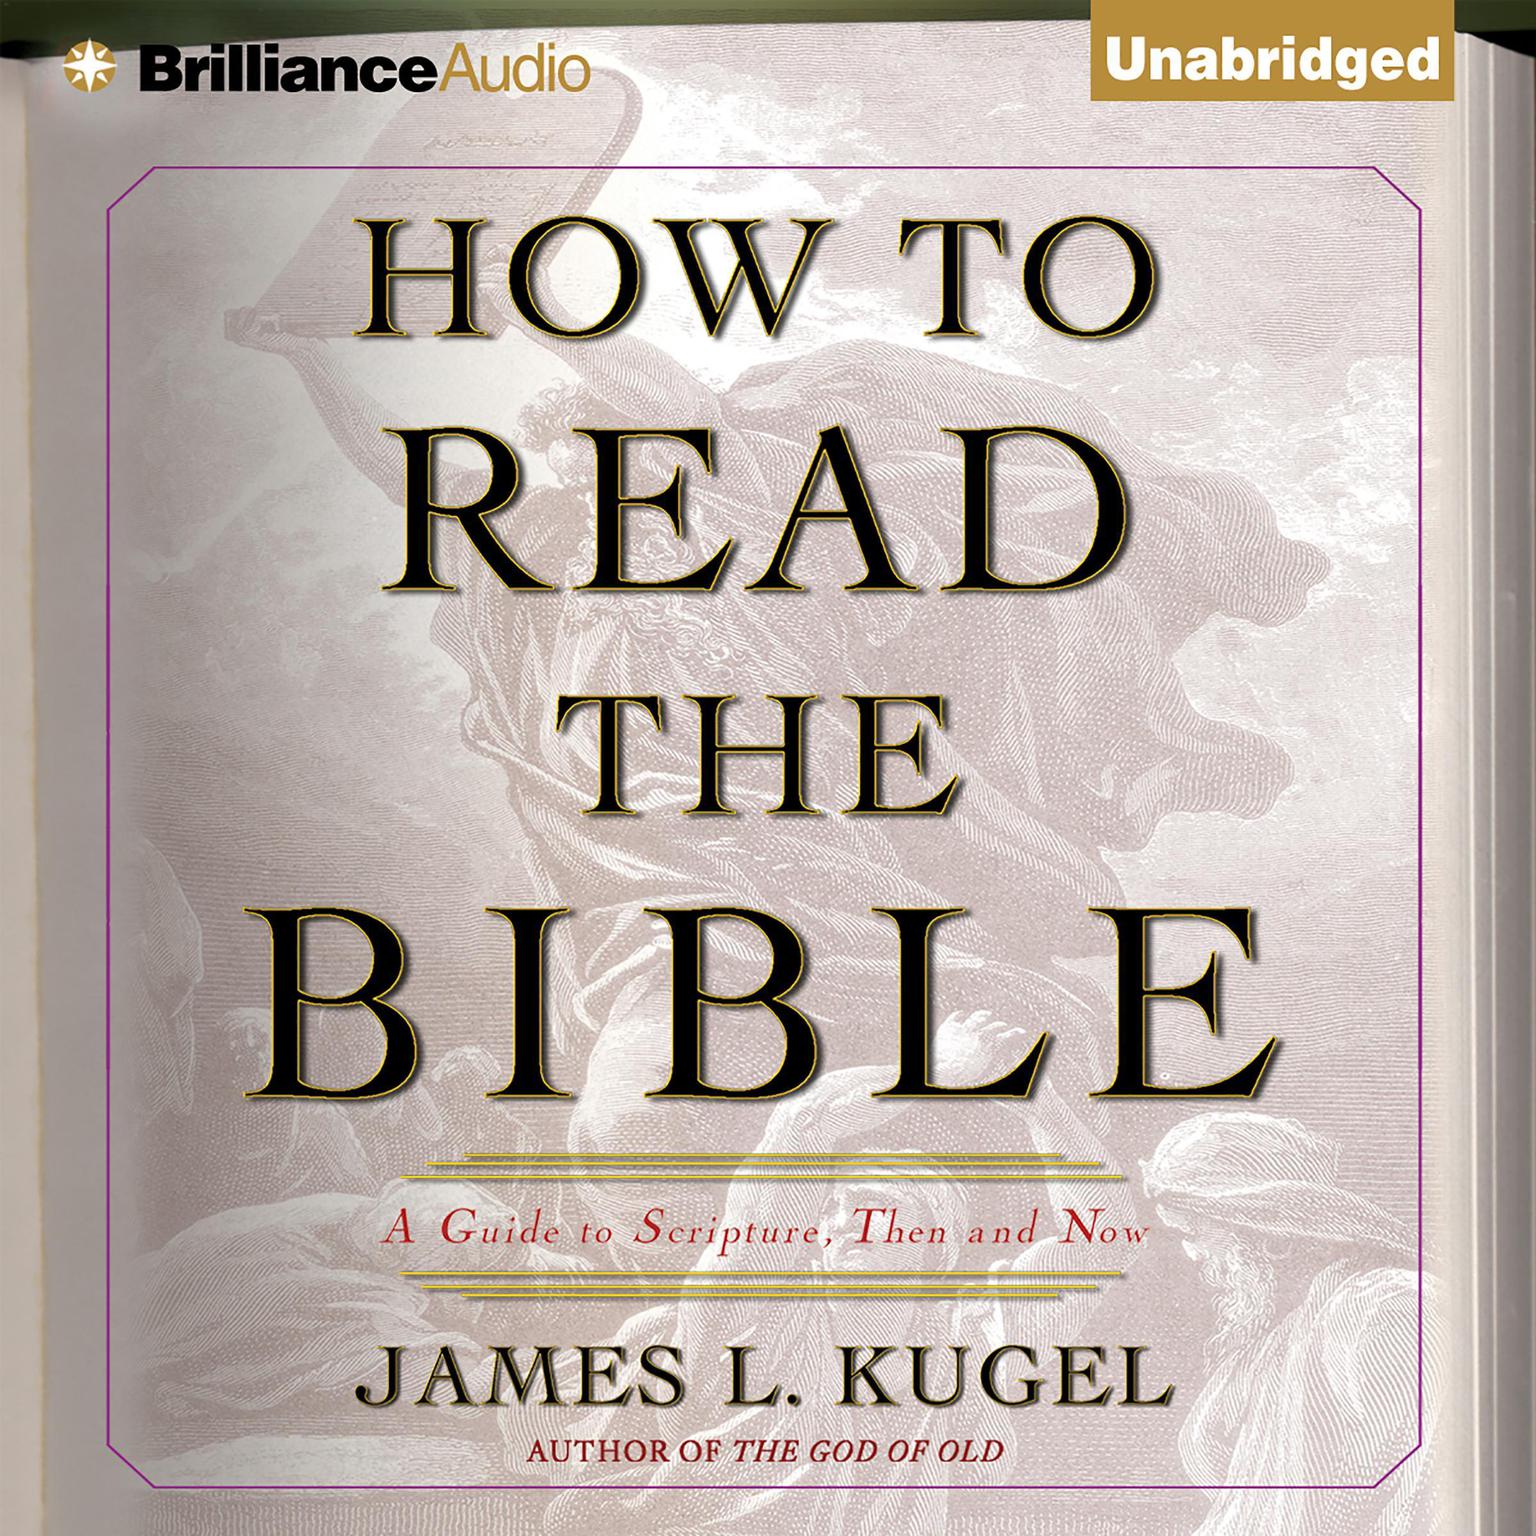 How to Read the Bible: A Guide to Scripture, Then and Now Audiobook, by James L. Kugel